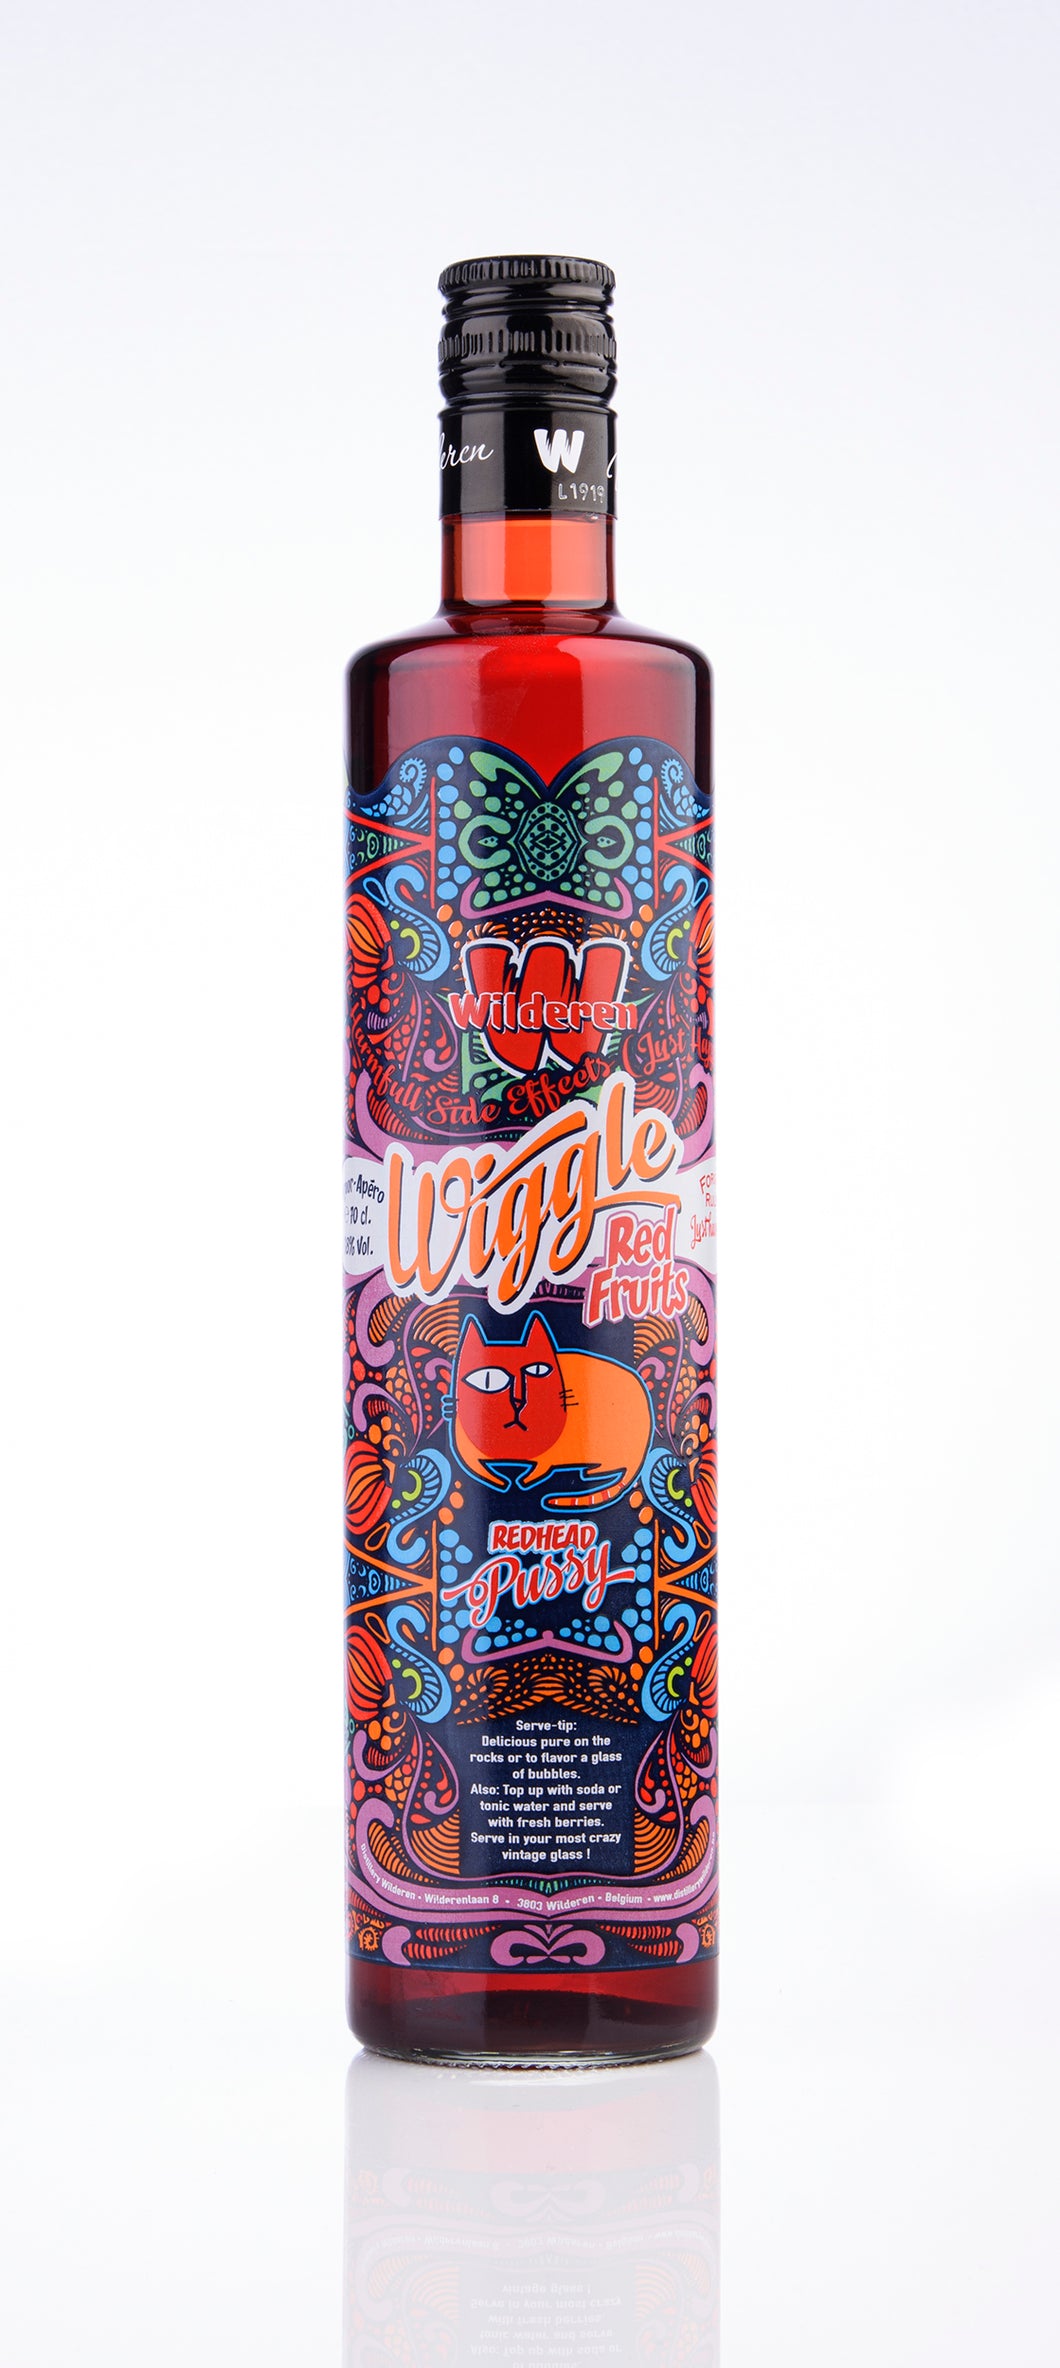 Wiggle Apéro Red Fruits 70cl